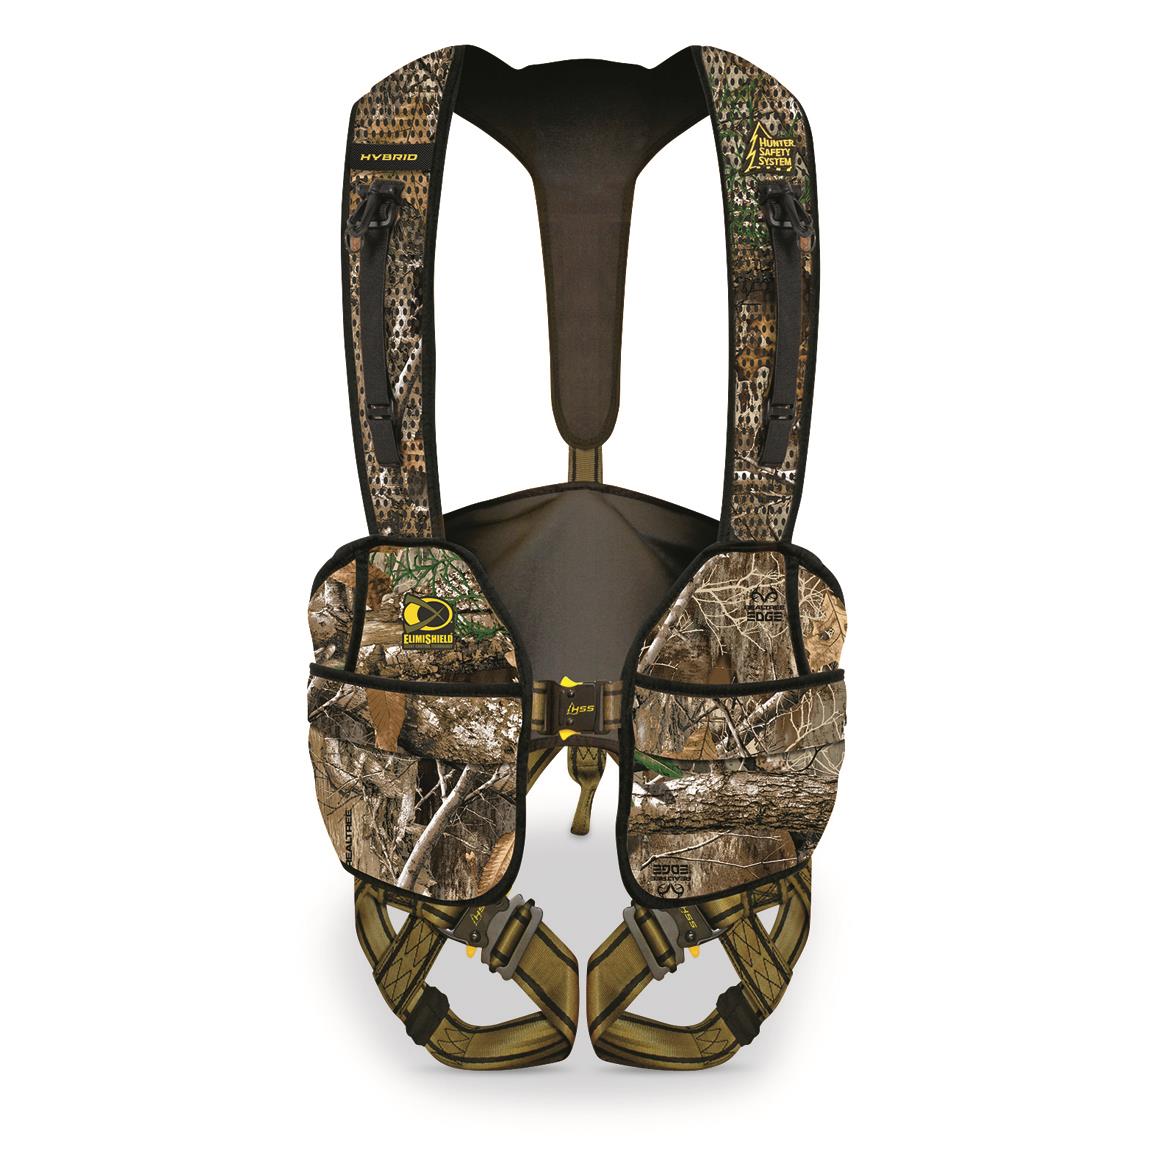 HSS Hybrid Safety Harness with ElimiShield Scent Control, Realtree EDGE